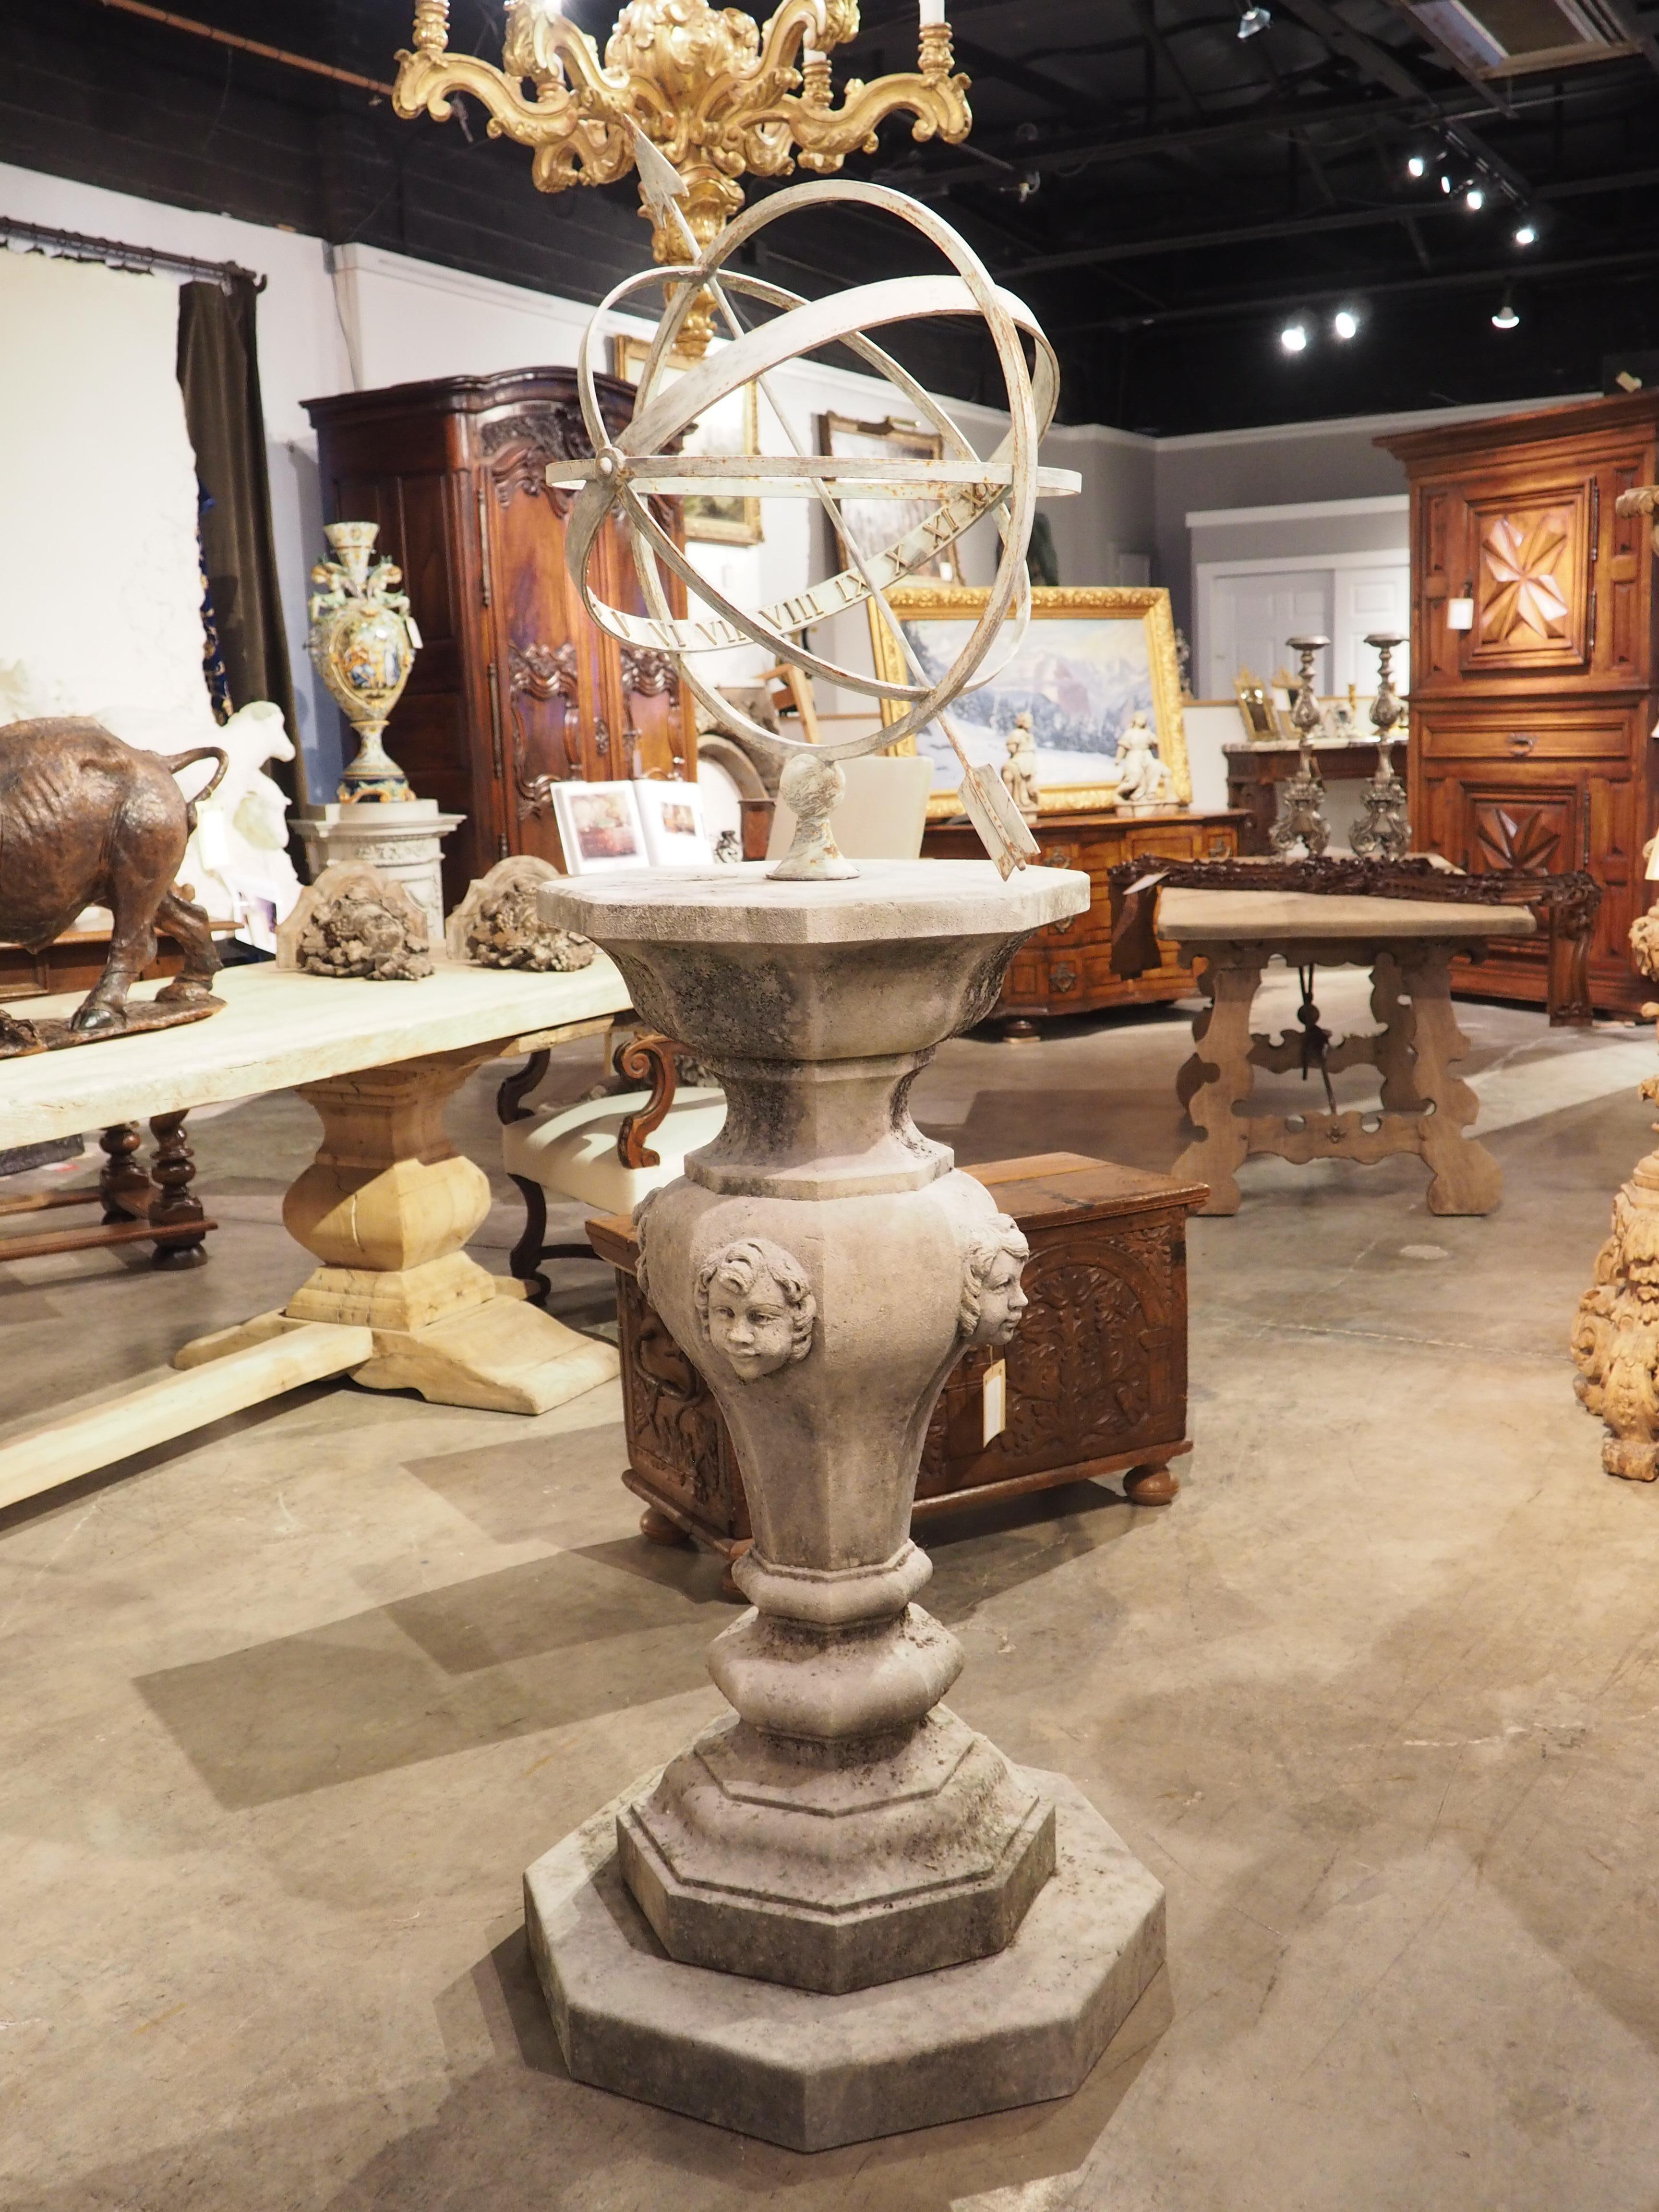 Hand-carved in Italy, this limestone armillary sundial features an octagonal step beneath a column adorned with putti mascarons. Both the stone pedestal and the iron armillary sphere have developed a fascinating patina from exposure to the